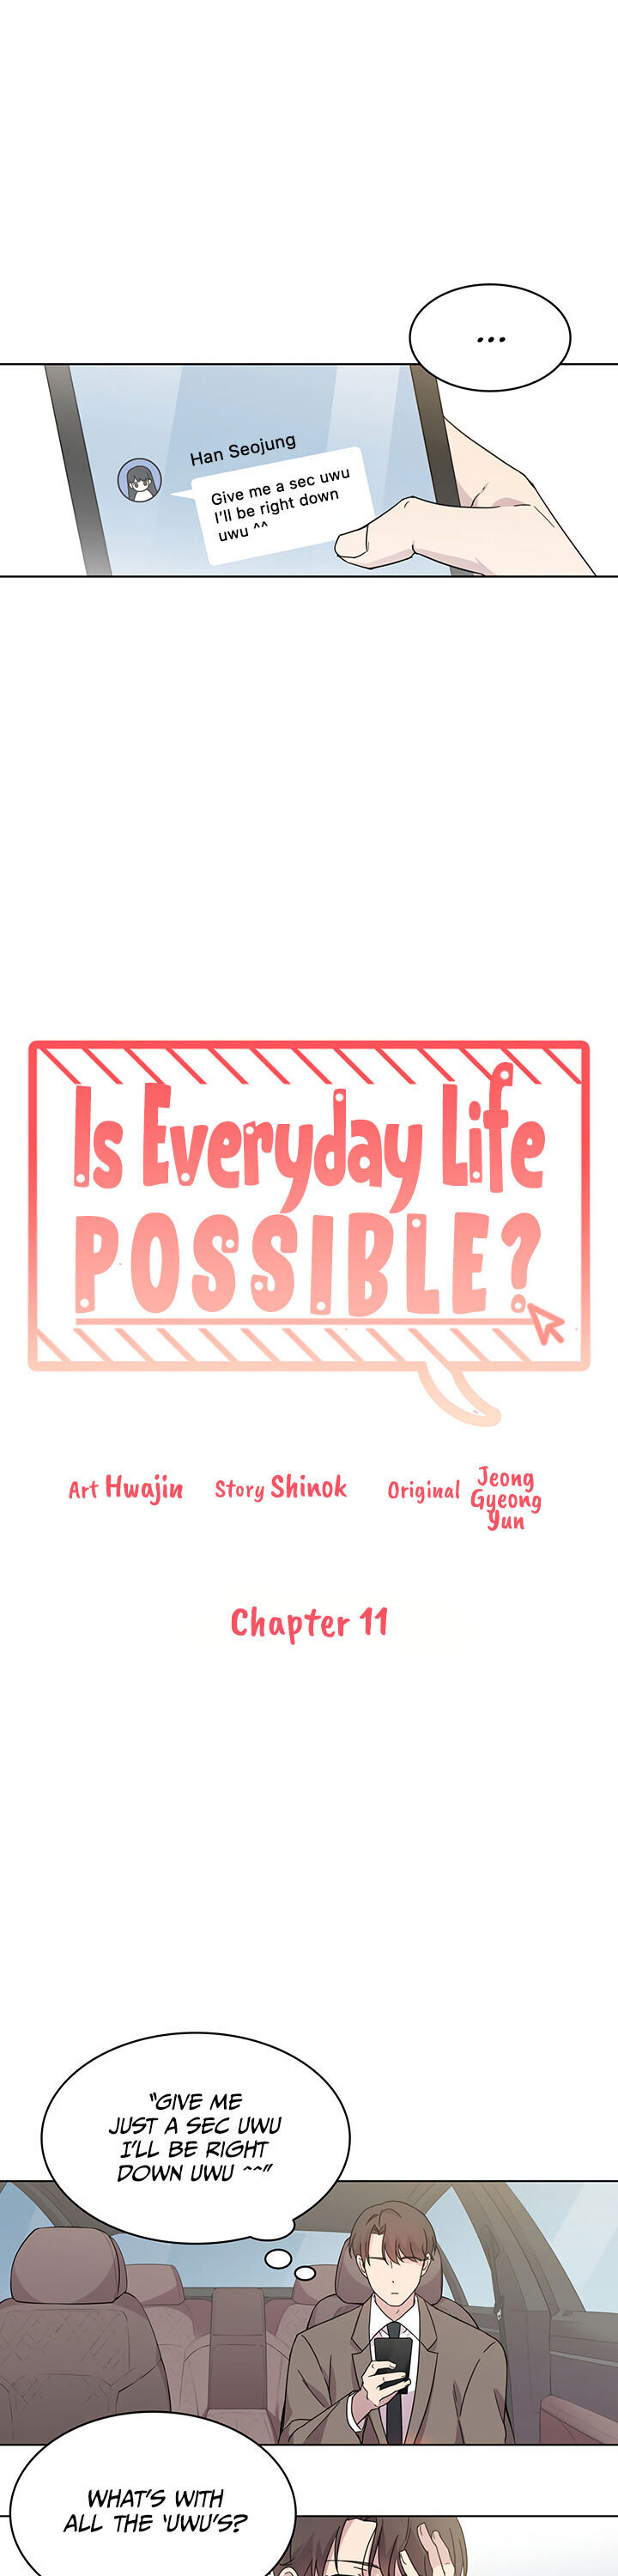 Is Everyday Life Possible? - Page 2